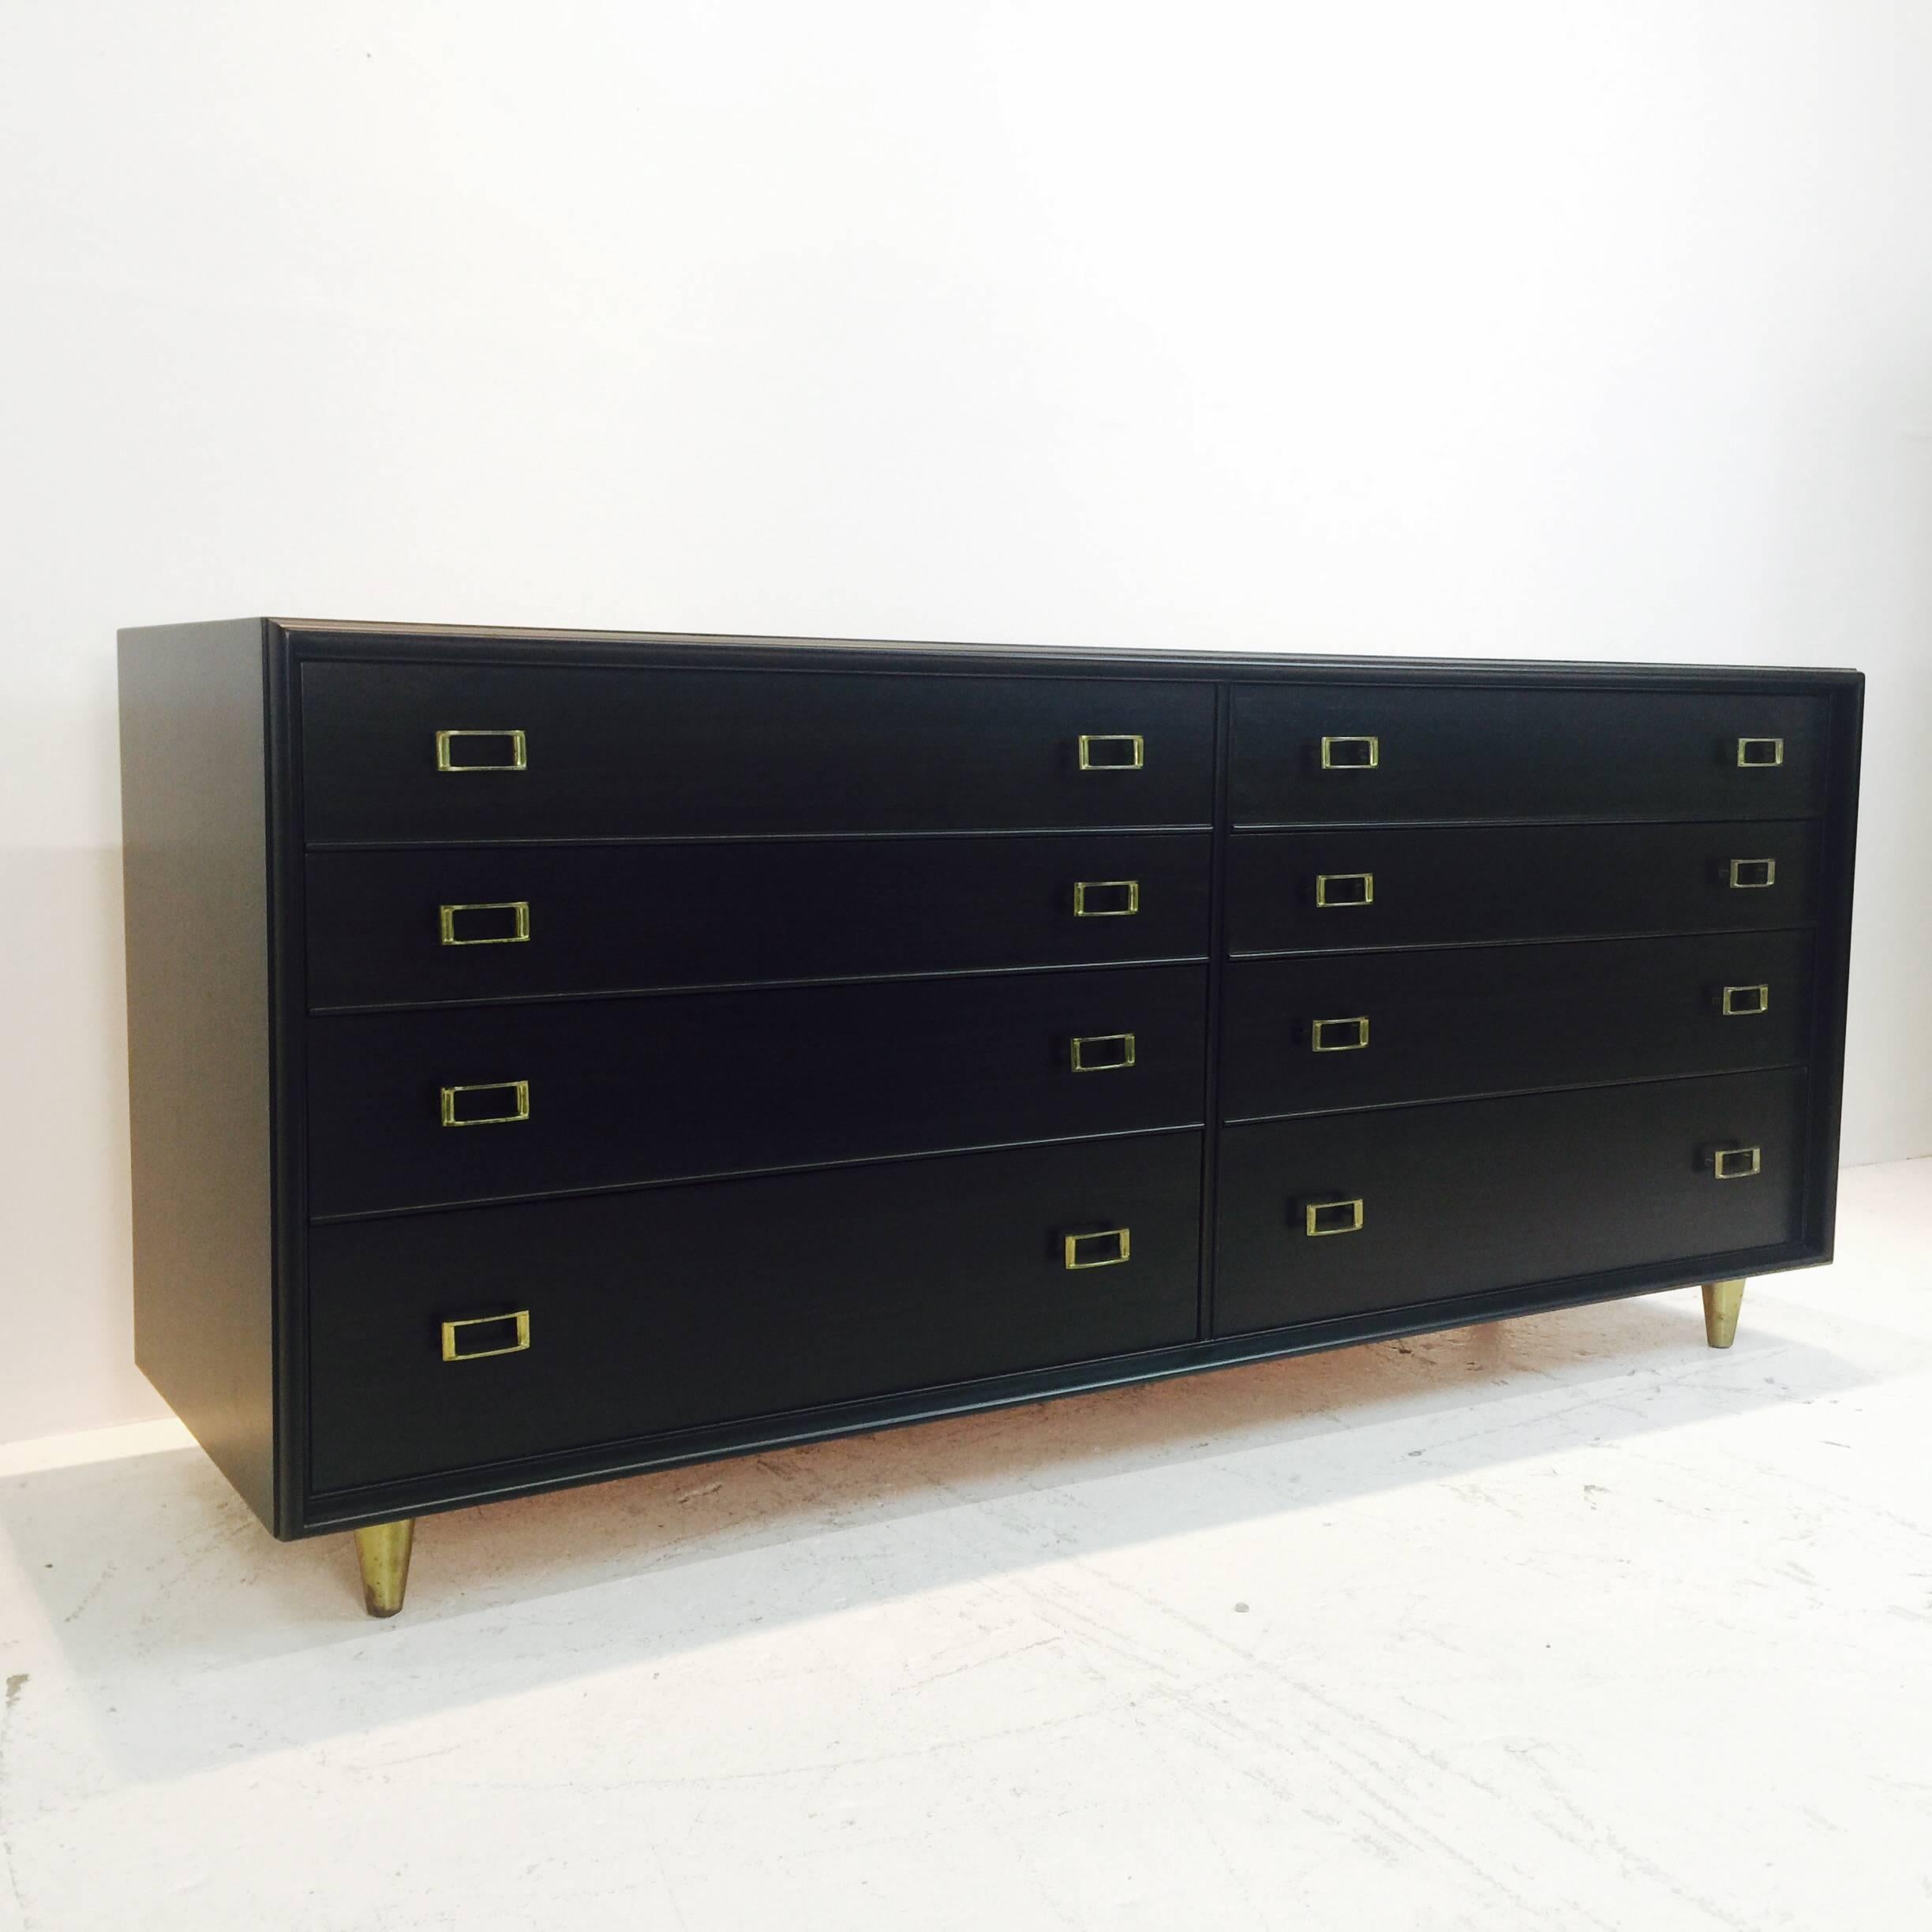 Eight-drawer dresser or credenza by Paul Frankl for Johnson Furniture with ebonized finish.

Dimensions: 72